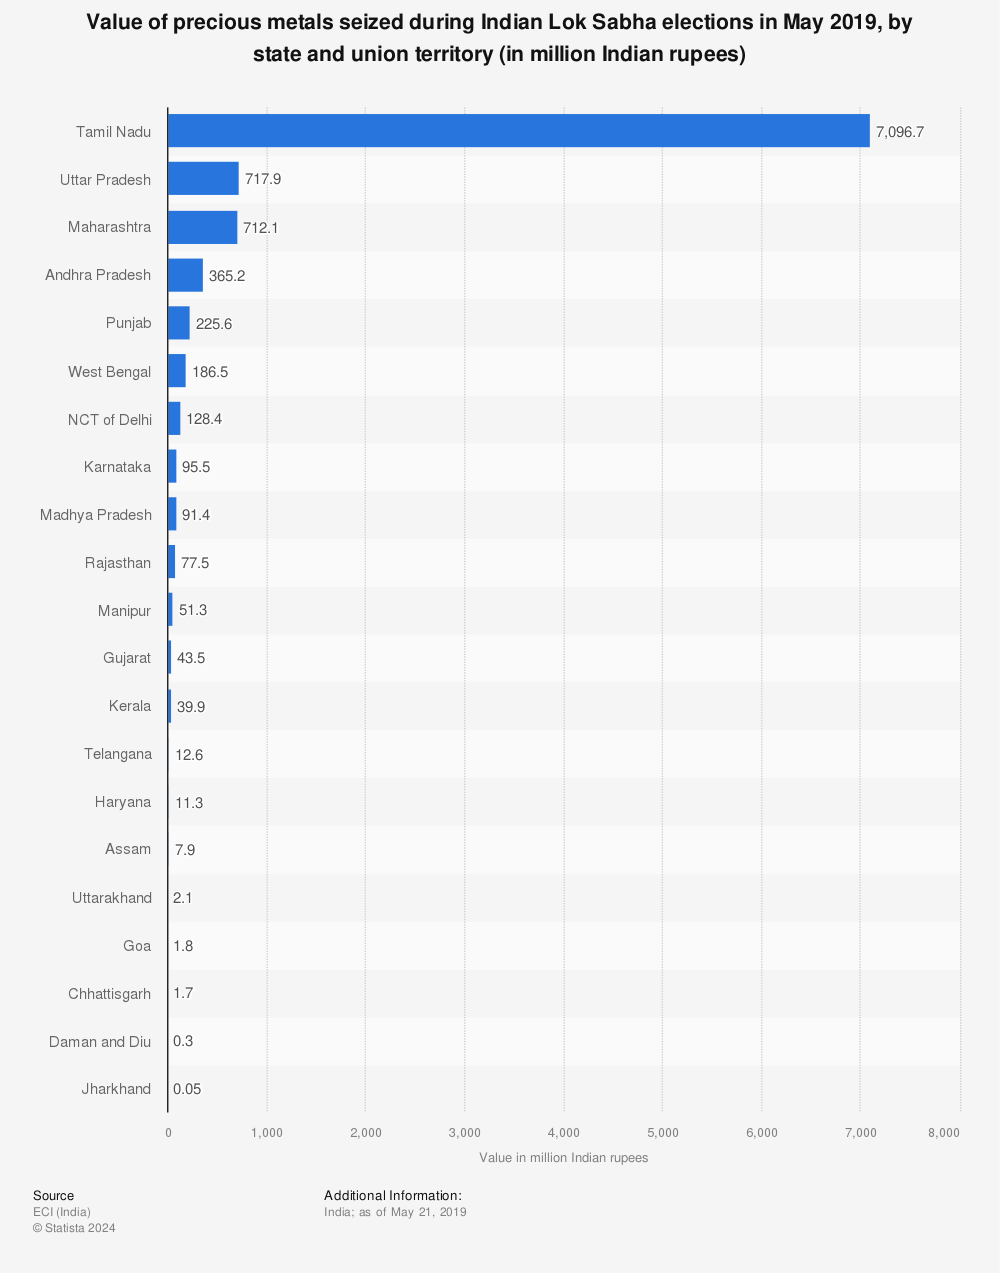 Statistic: Value of precious metals seized during Indian Lok Sabha elections in May 2019, by state and union territory (in million Indian rupees) | Statista